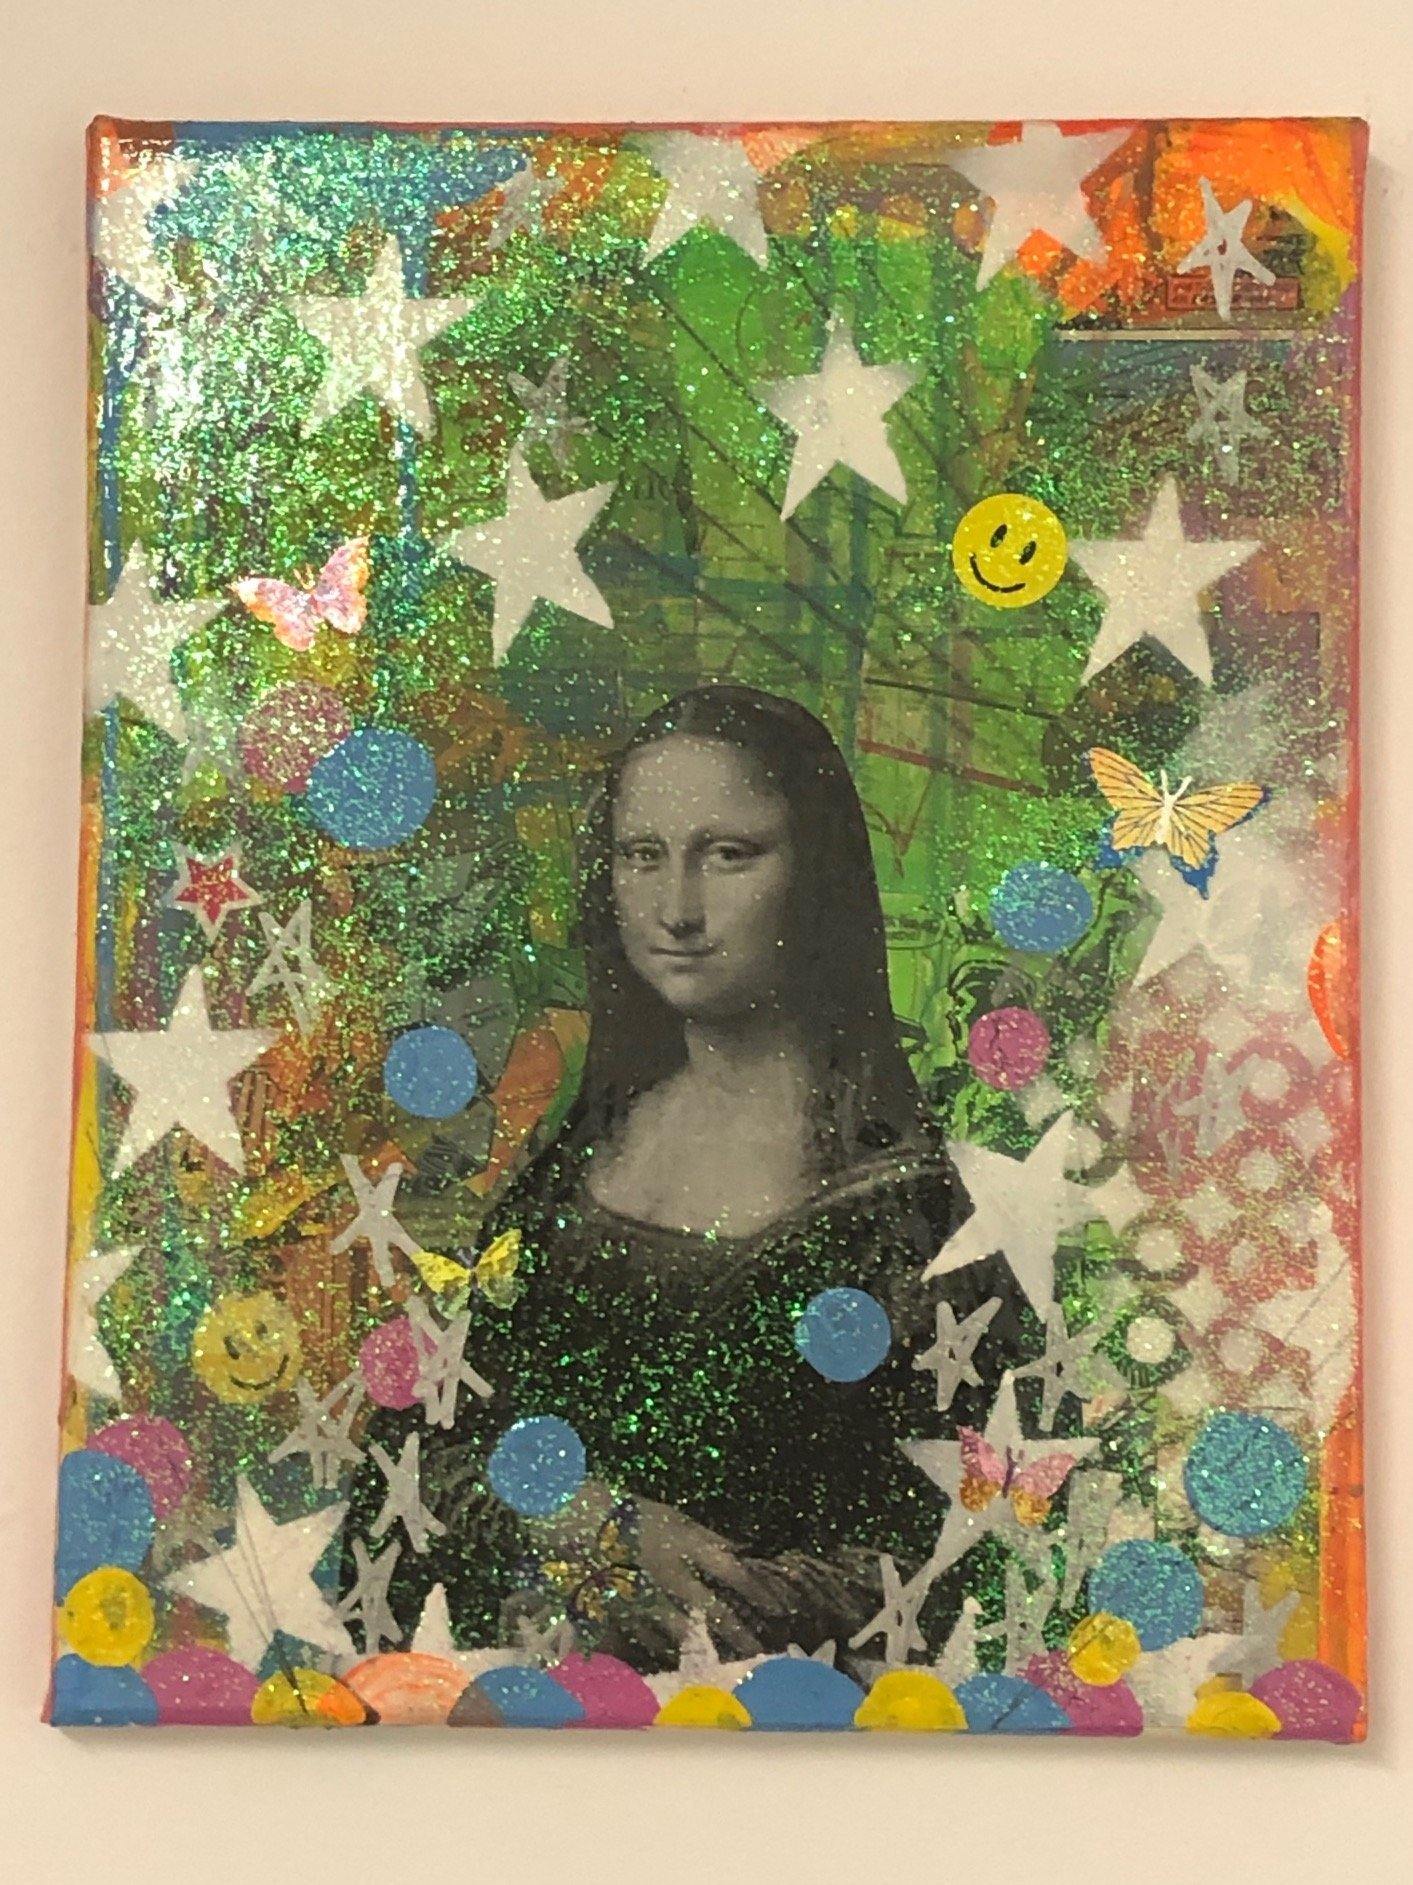 Mona Lisa dream by Barrie J Davies 2019, mixed media on canvas. Fun Colourful Pop Art Street Artist based in Brighton. Buy online for free delivery worldwide.